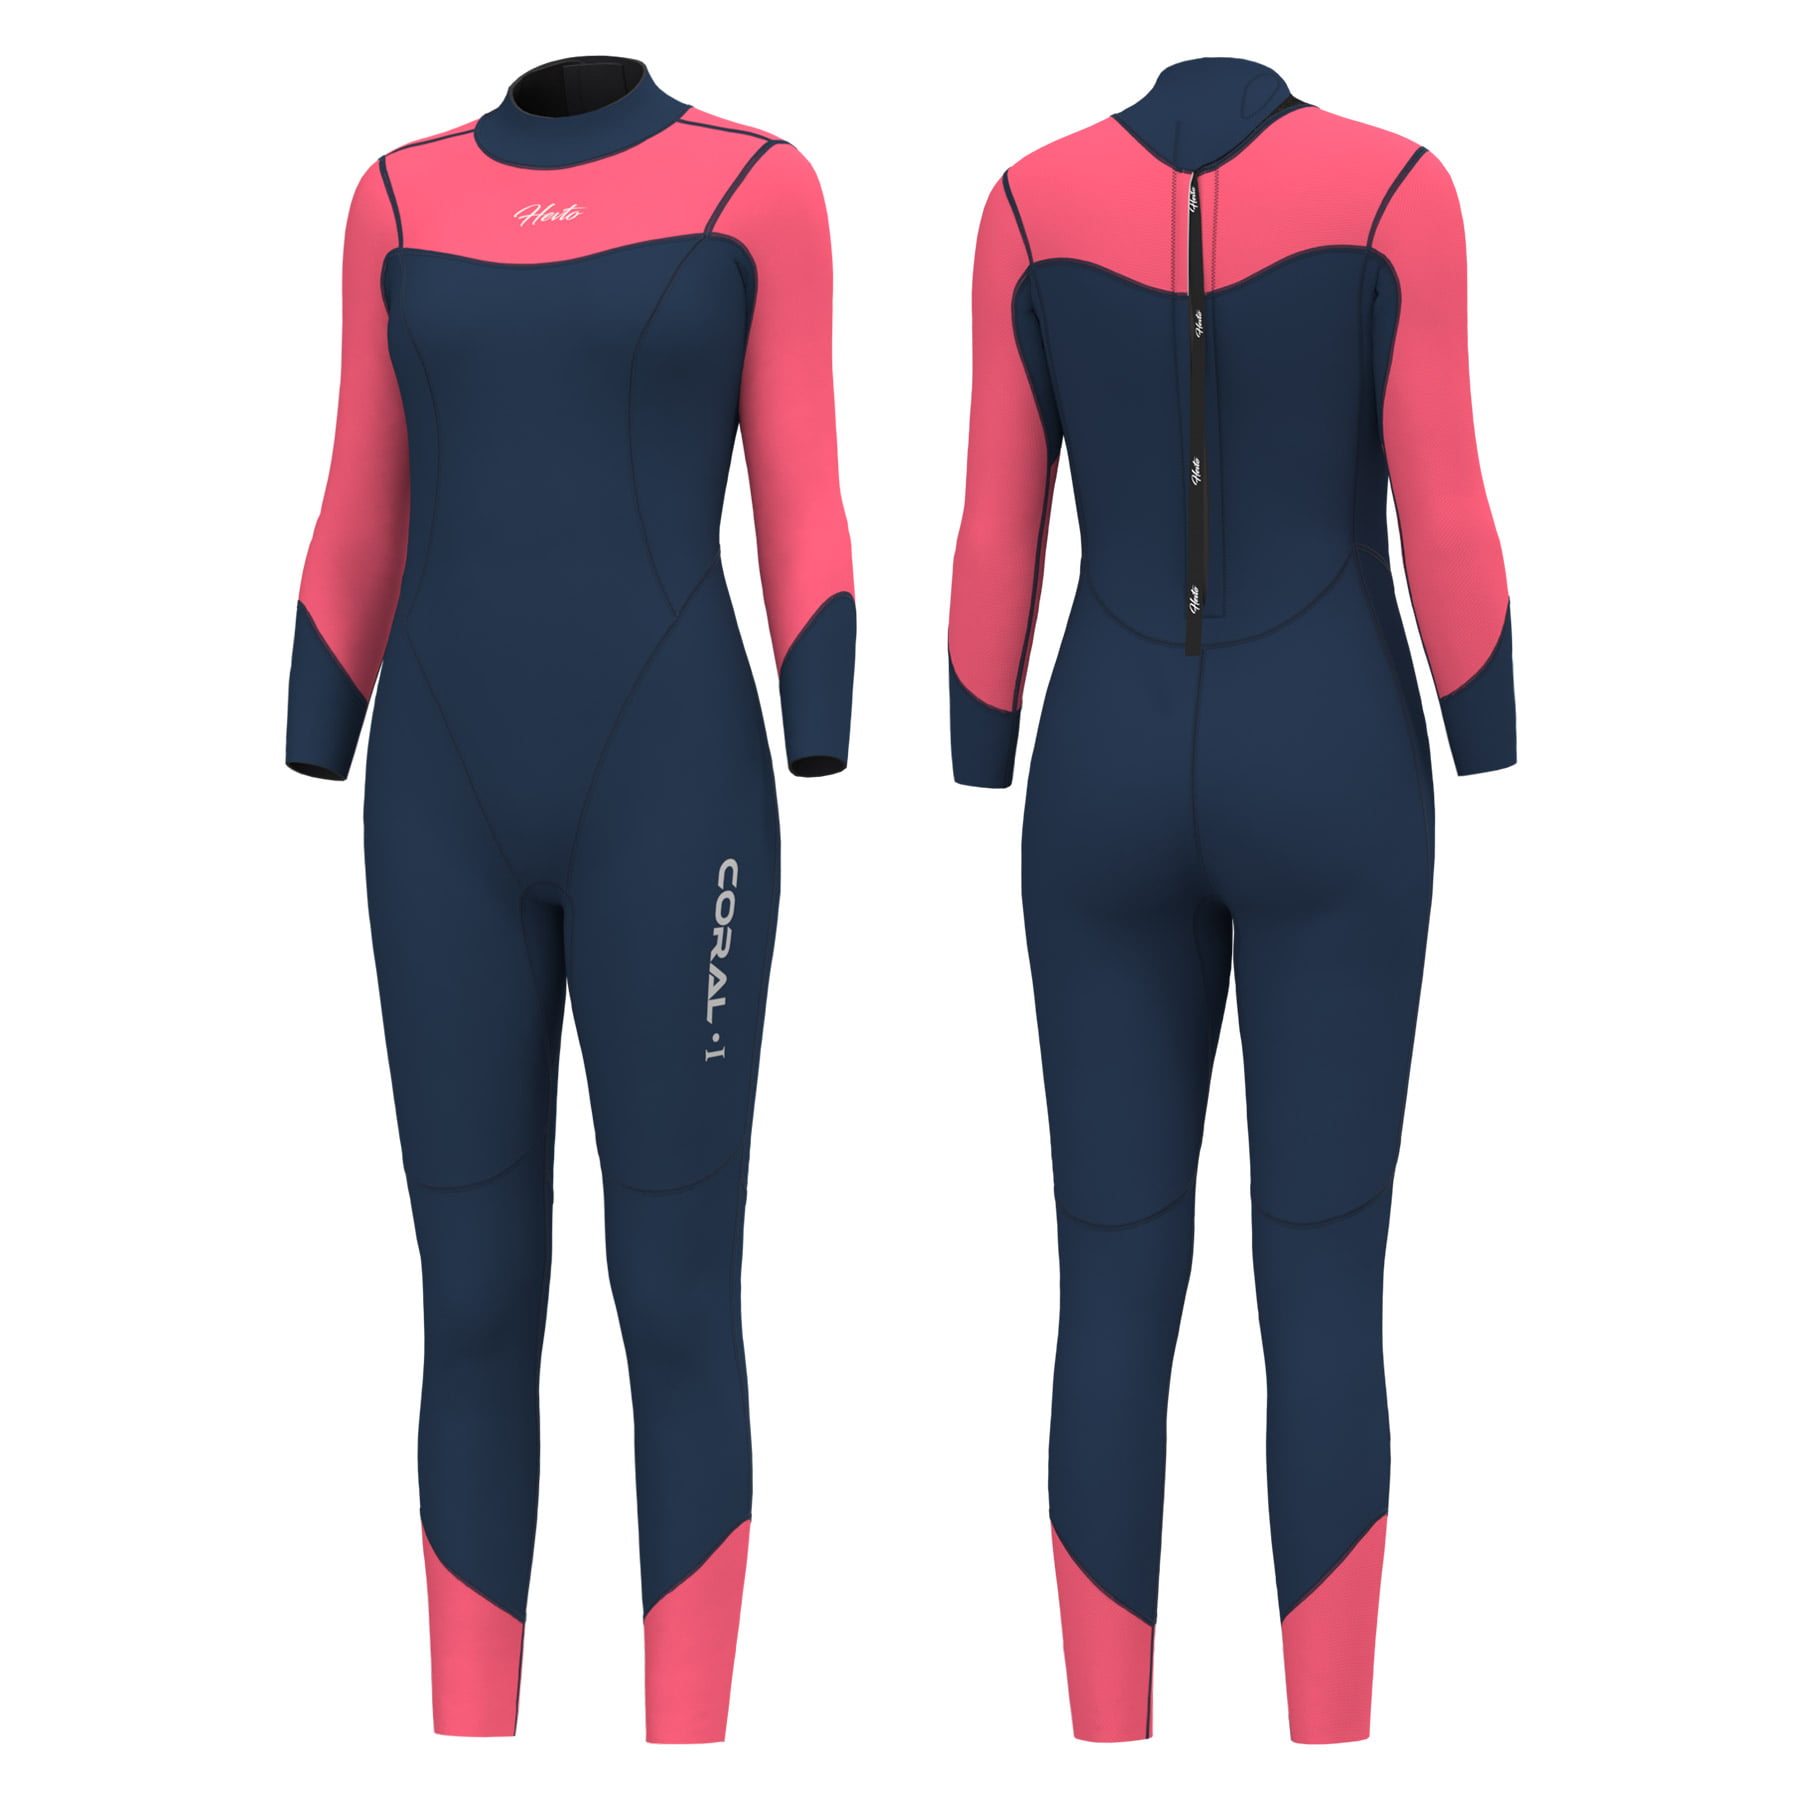 Hevto Wetsuits Tops X Men and Women 3mm Neoprene Jacket Long Sleeve Surfing Swimming Front Zip Keep Warm for Water Sports 